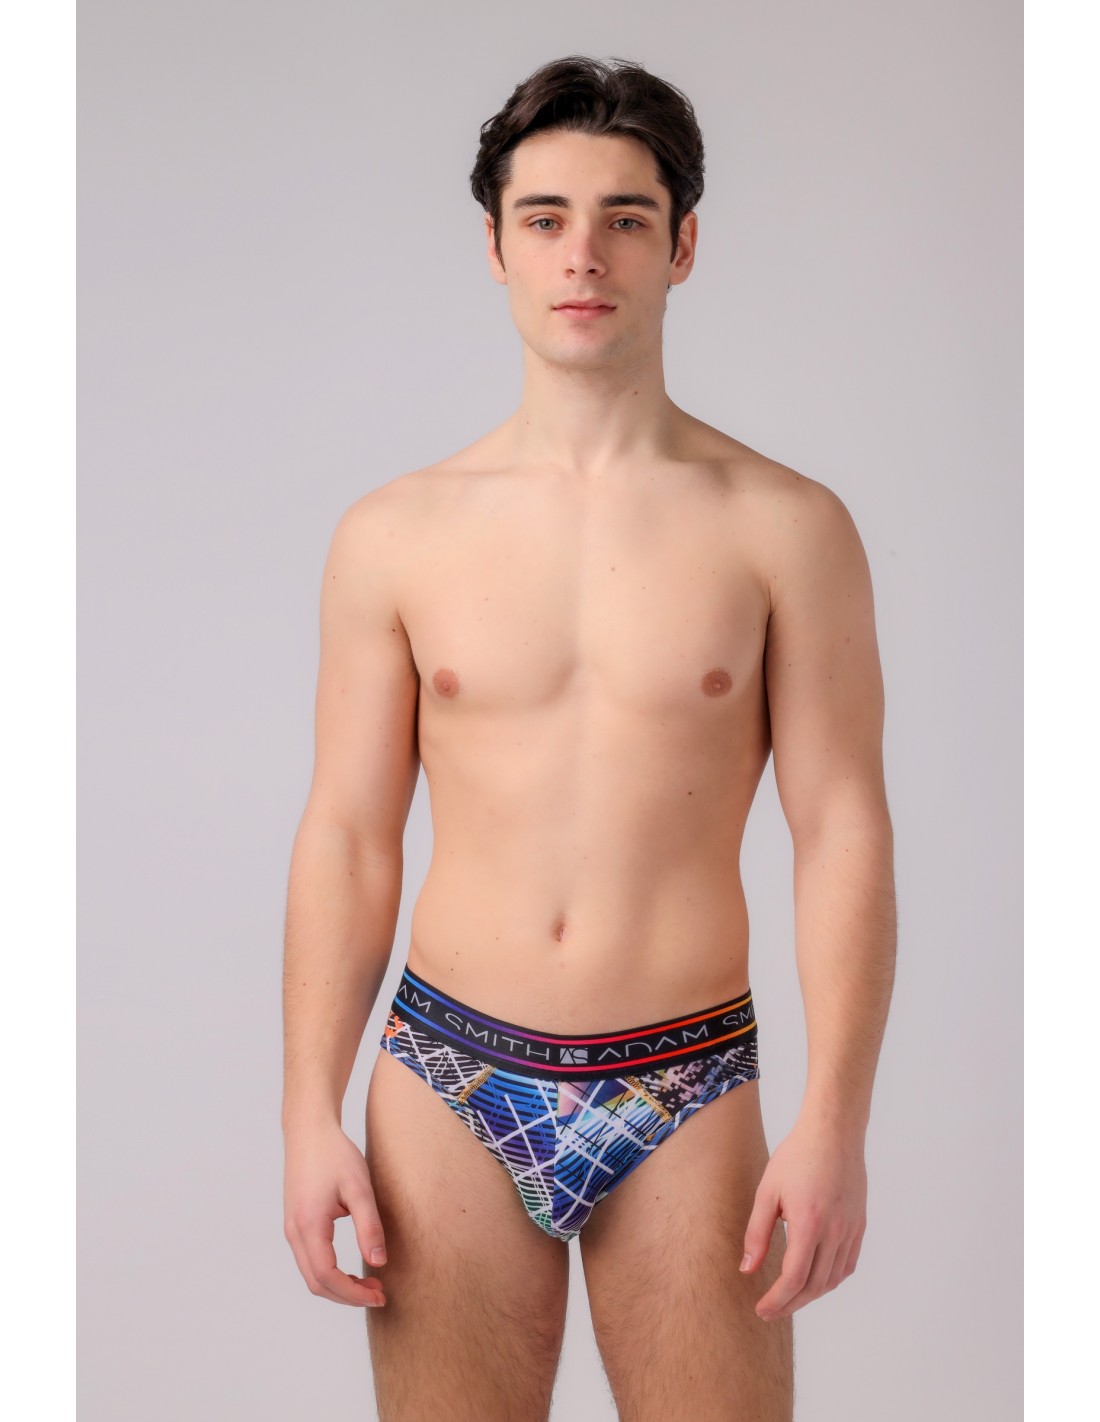 COTTON BOXERS WITH GEOMETRIC PRINT